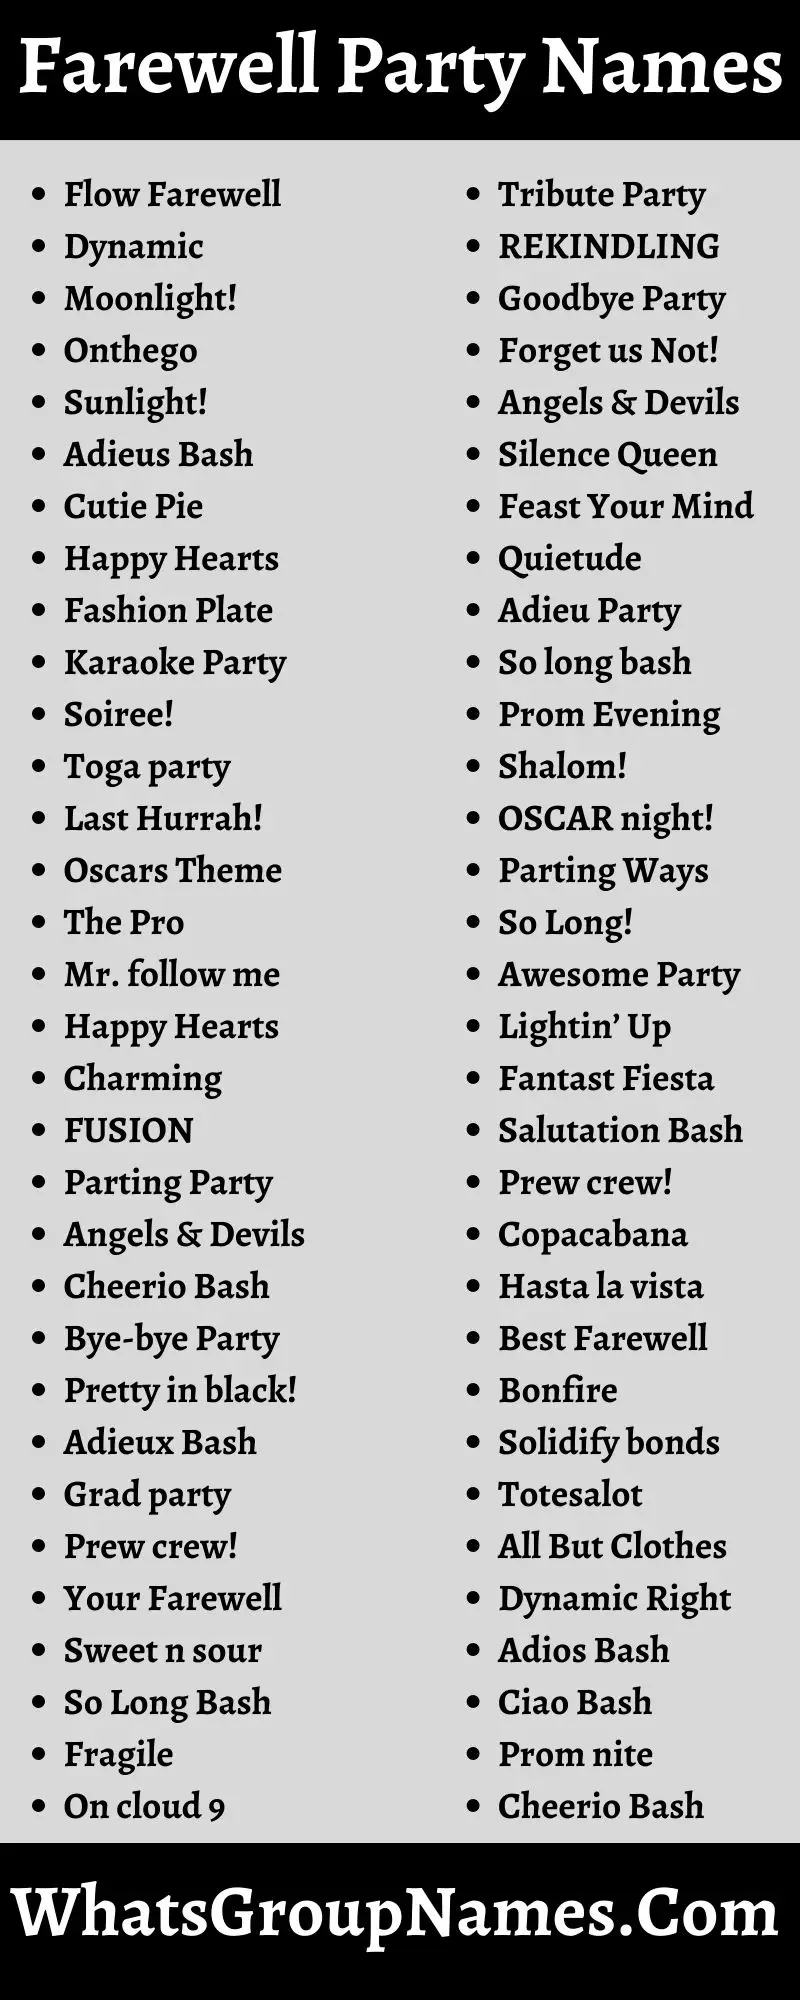 Farewell Party Names